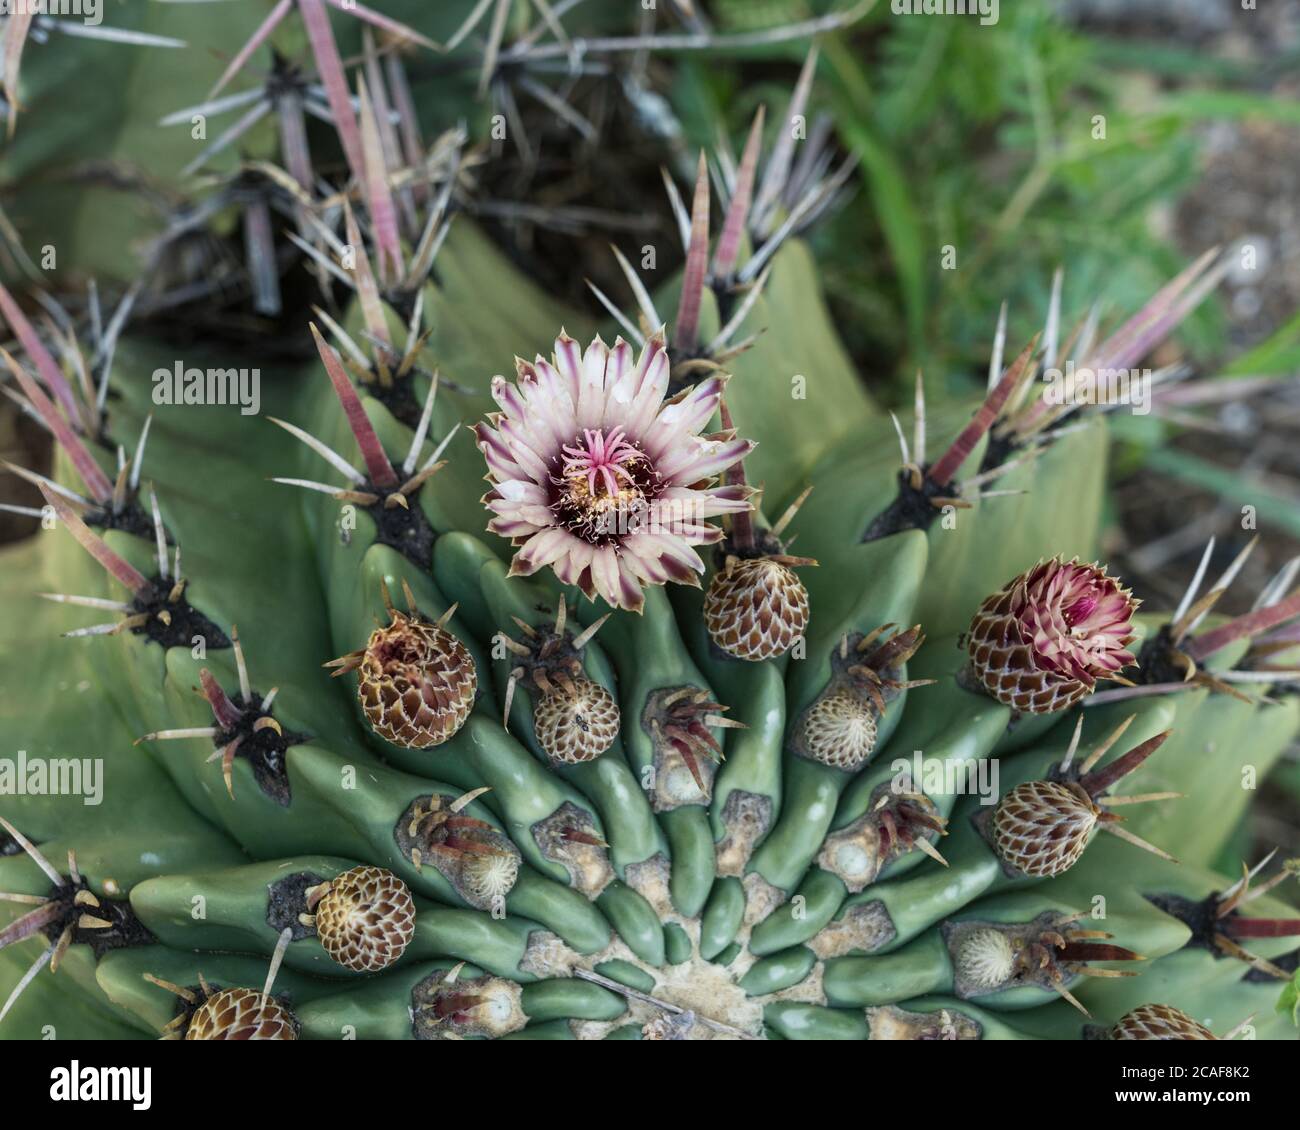 A blossom on a cactus at the ruins of the Zapotec city of Zaachila in the Central Valley of Oaxaca, Mexico. Stock Photo